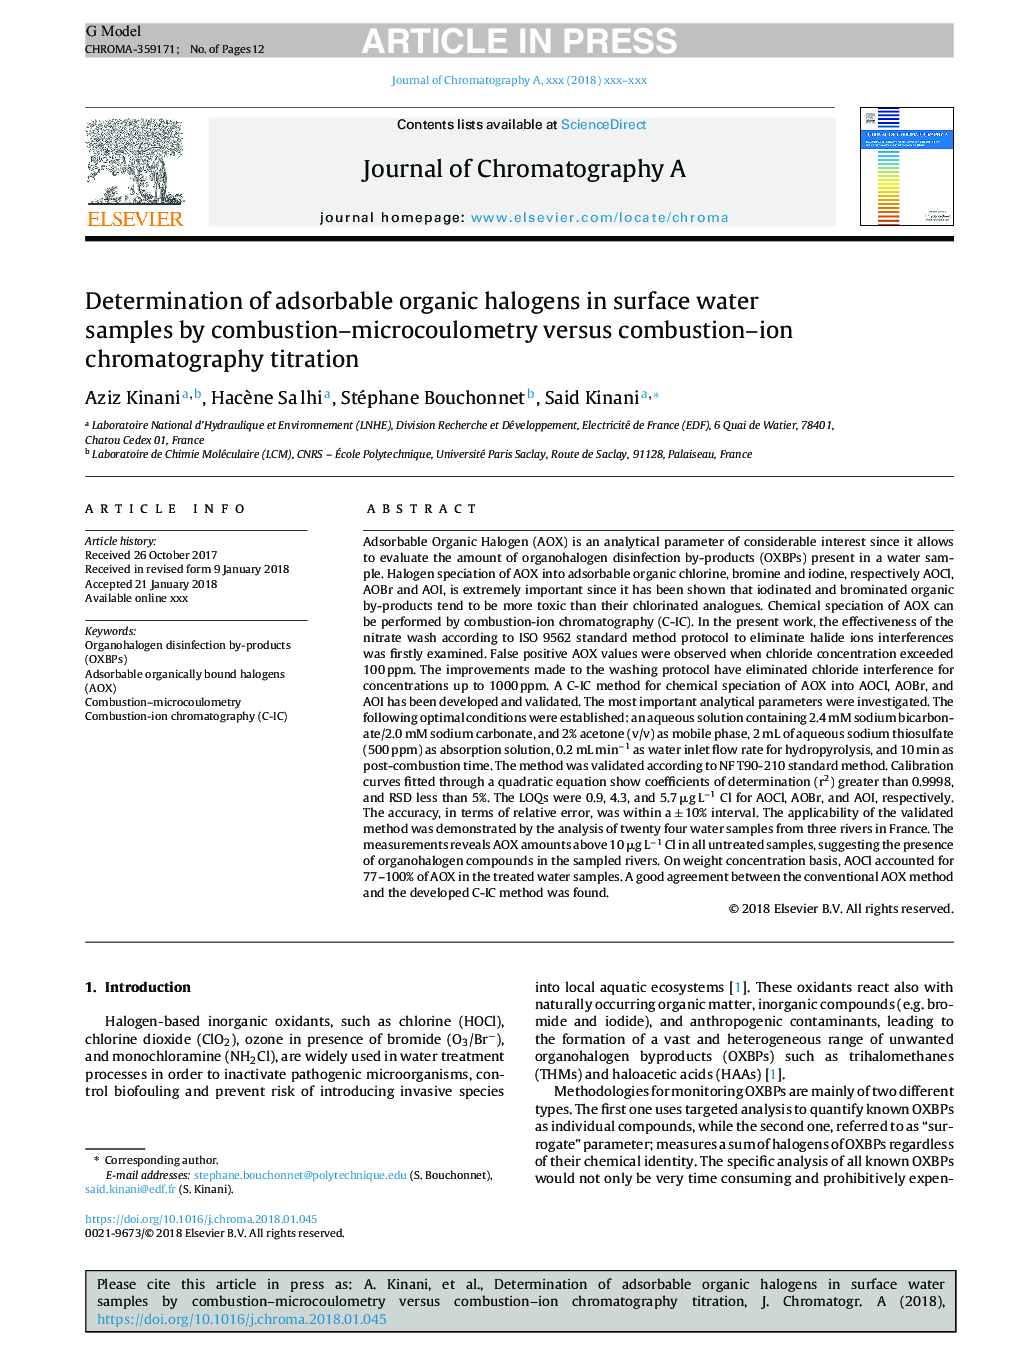 Determination of adsorbable organic halogens in surface water samples by combustion-microcoulometry versus combustion-ion chromatography titration